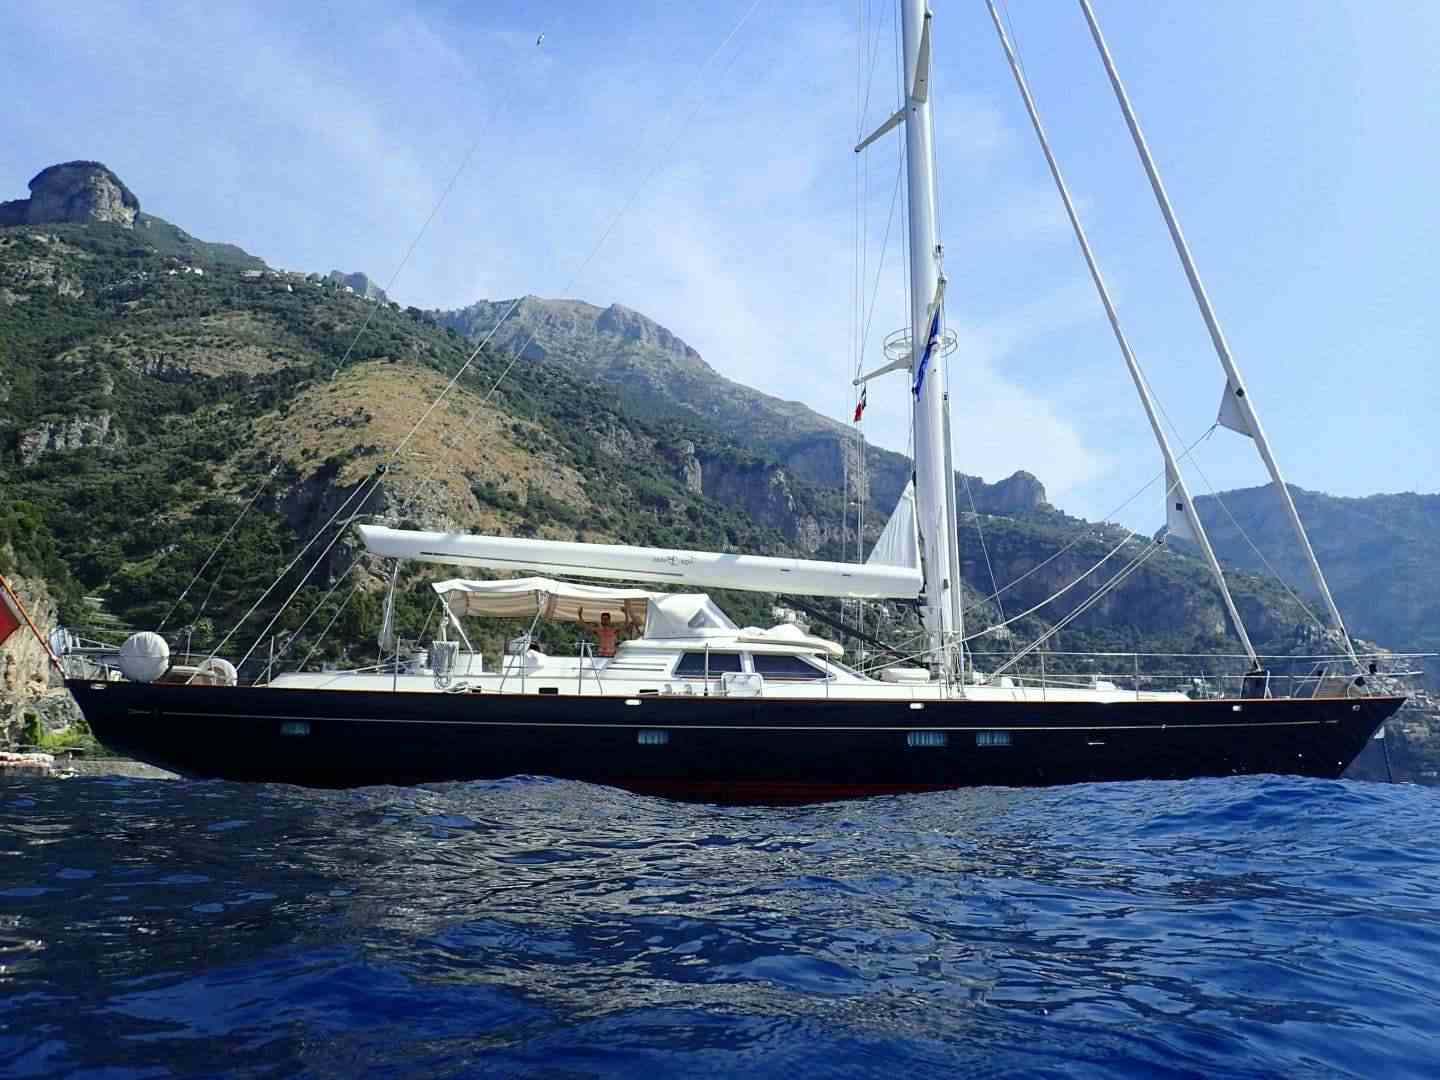 TIGA BELAS - Yacht Charter Germany & Boat hire in North europe 1